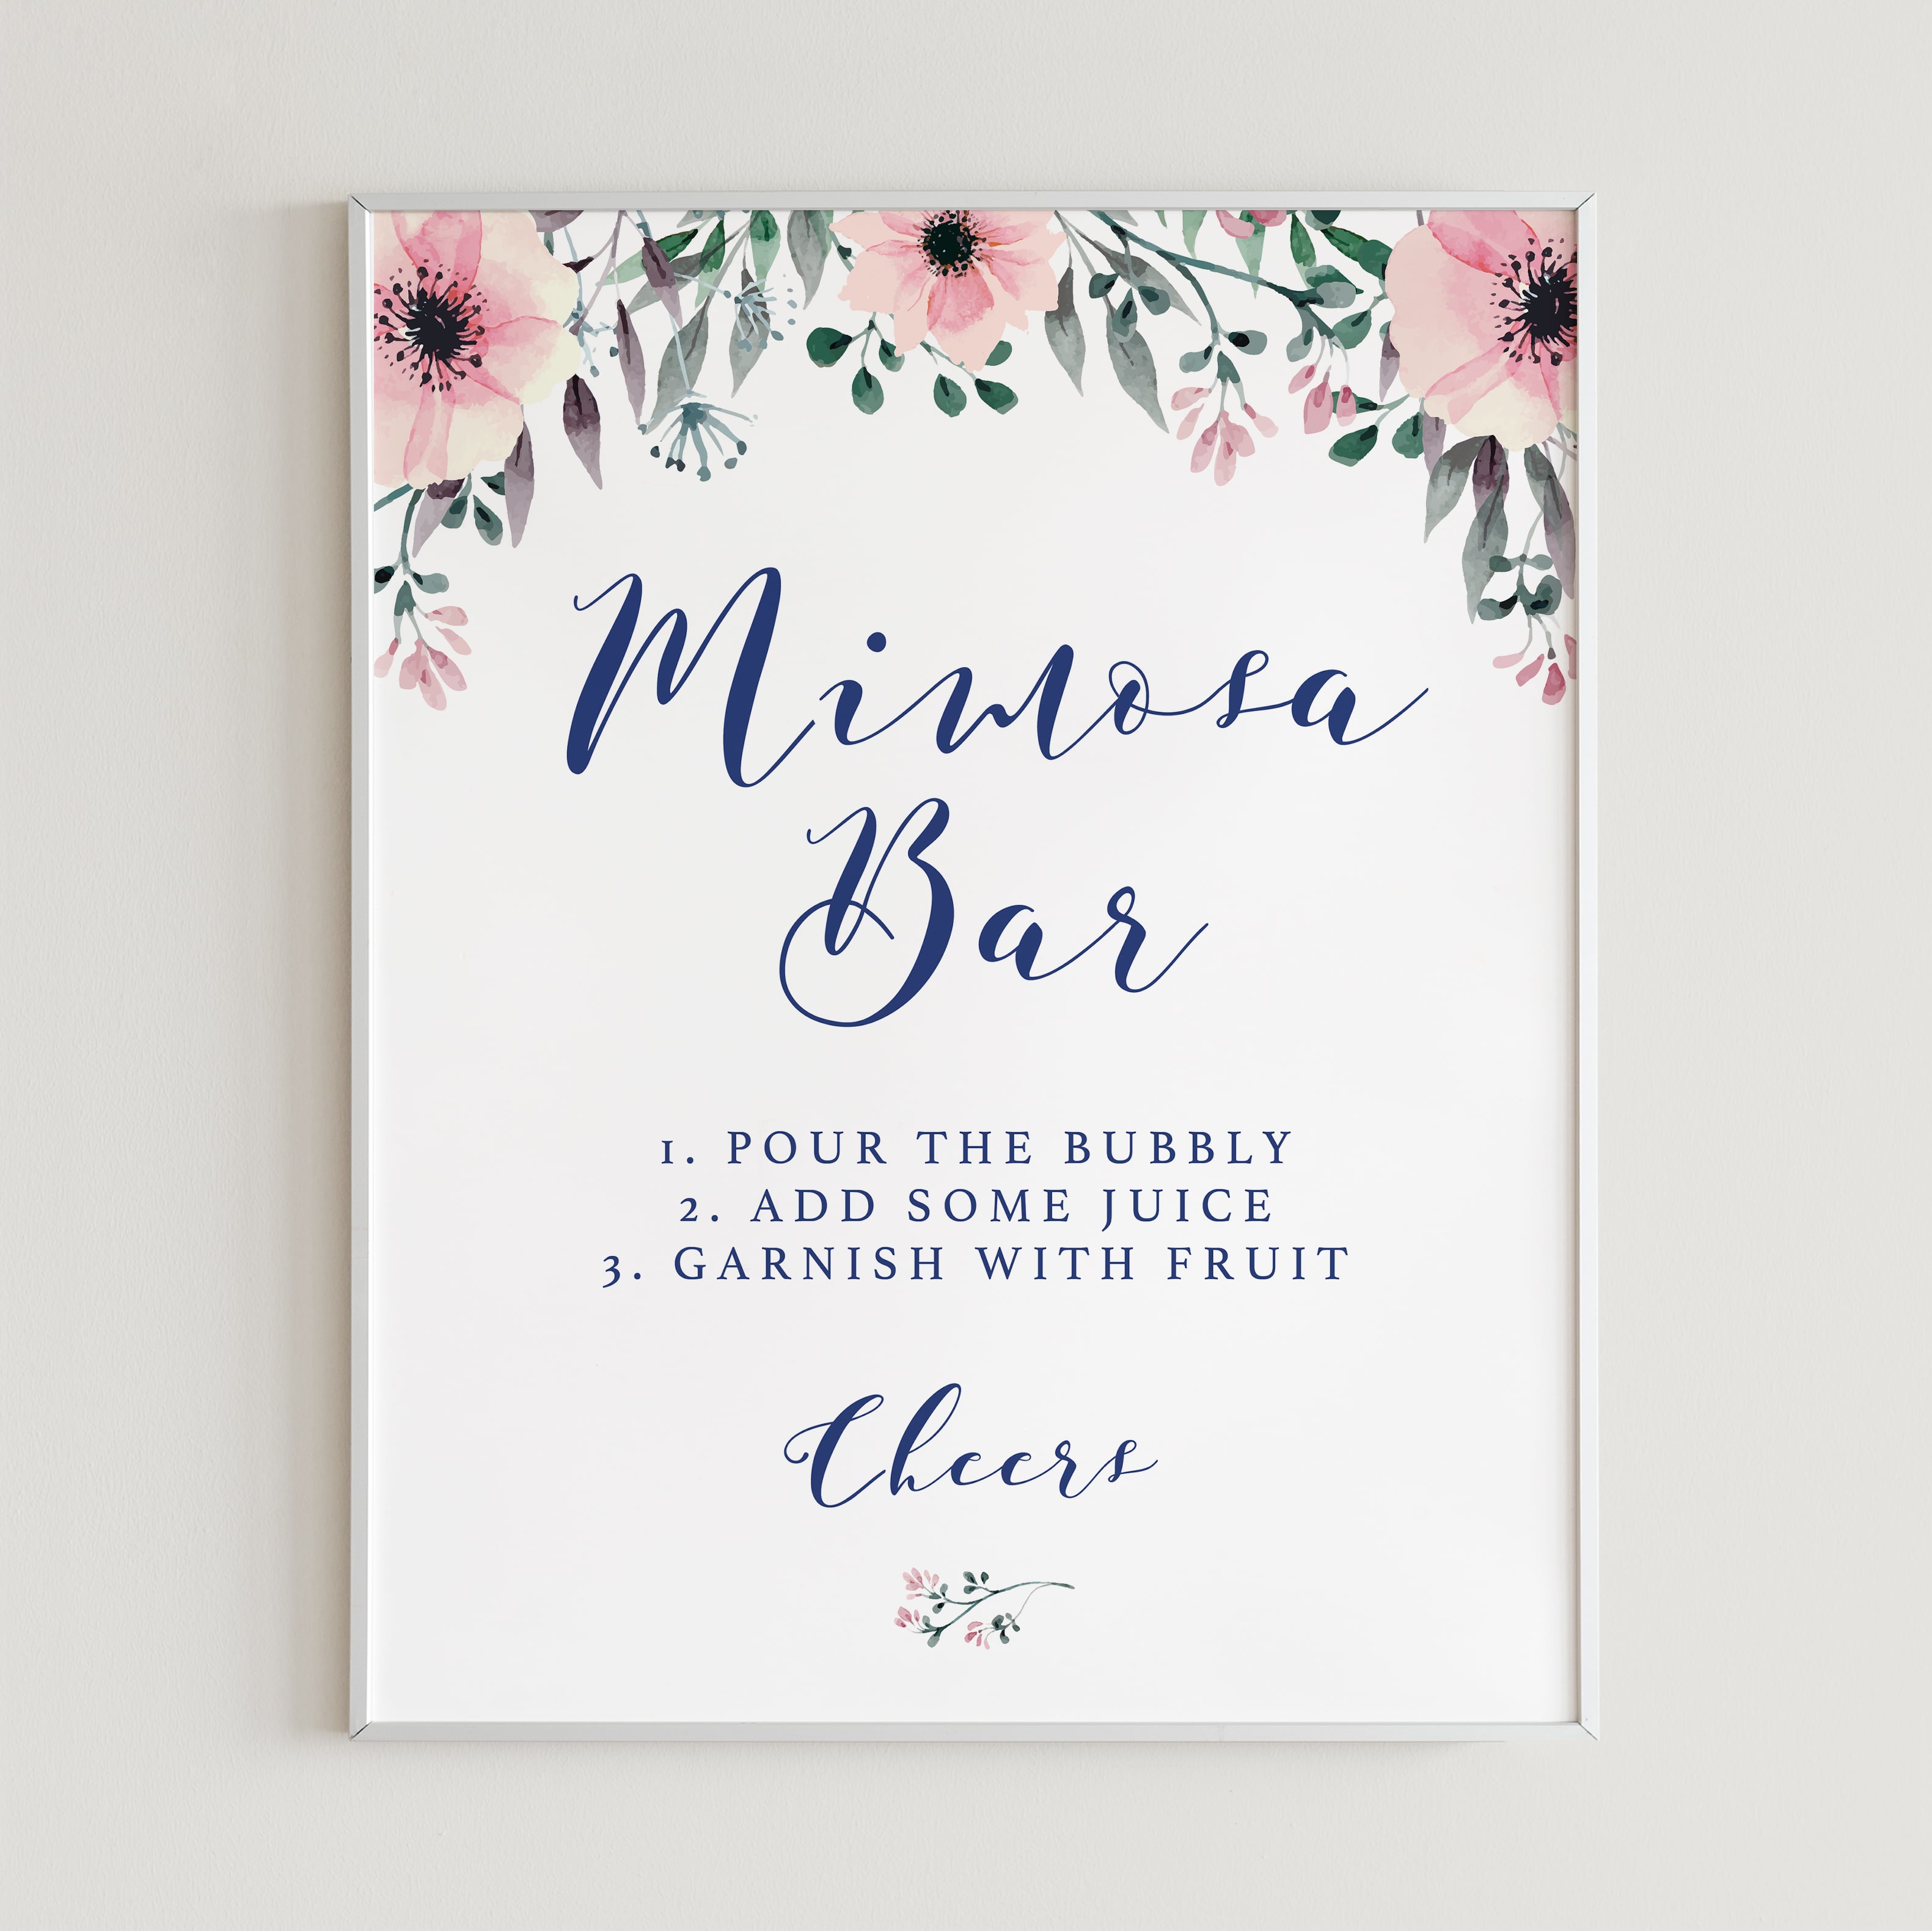 Mimosa Bar Supplies Kit - Floral Mimosa Bar Sign - Elegant Blush Pink Table Place Cards - Bridal Shower, Birthday Party, Bubbly Bar, Engagement/